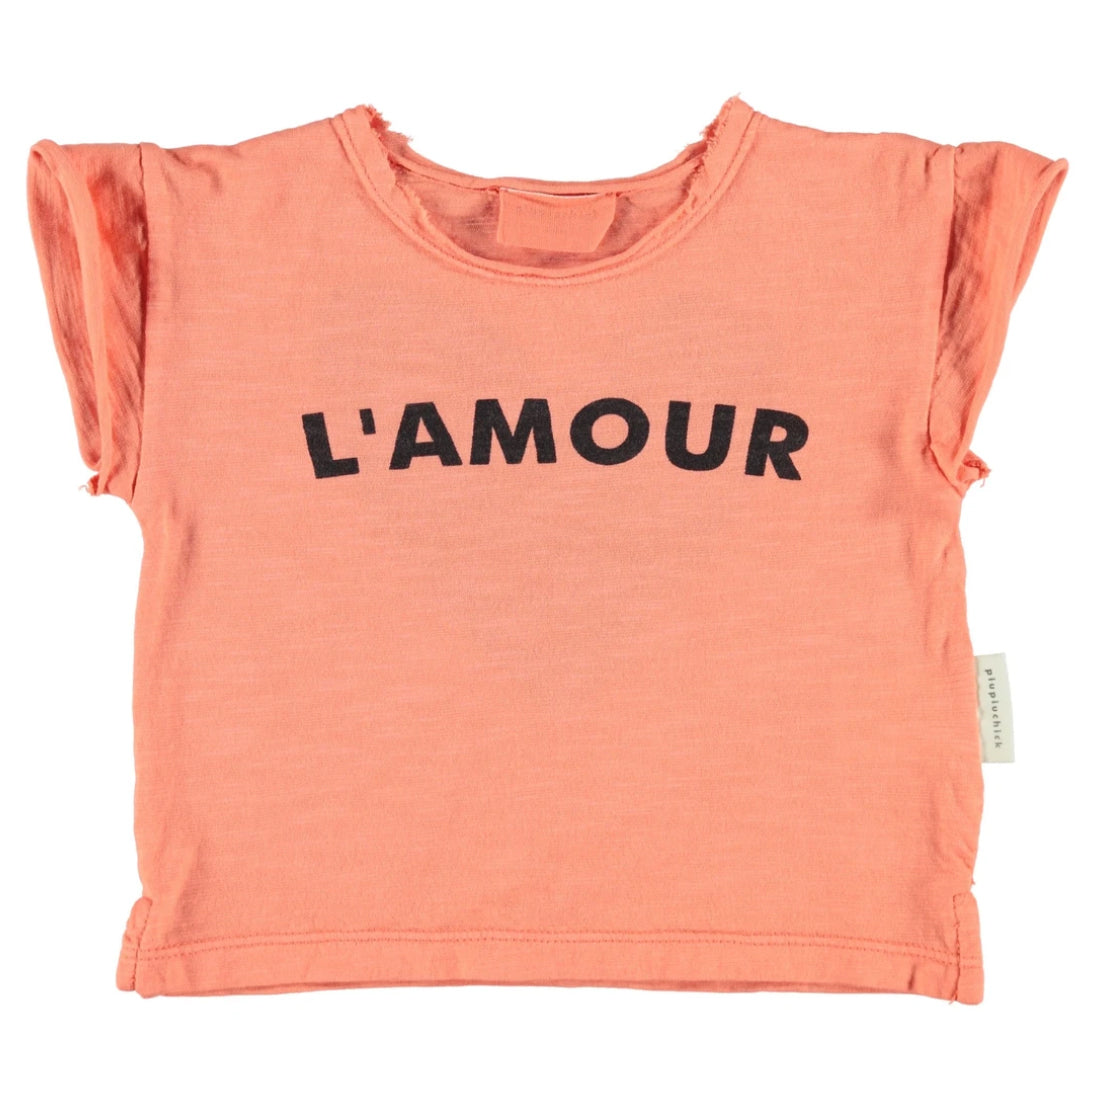 SpearmintLOVE’s baby "L'Amour" Baby Tee